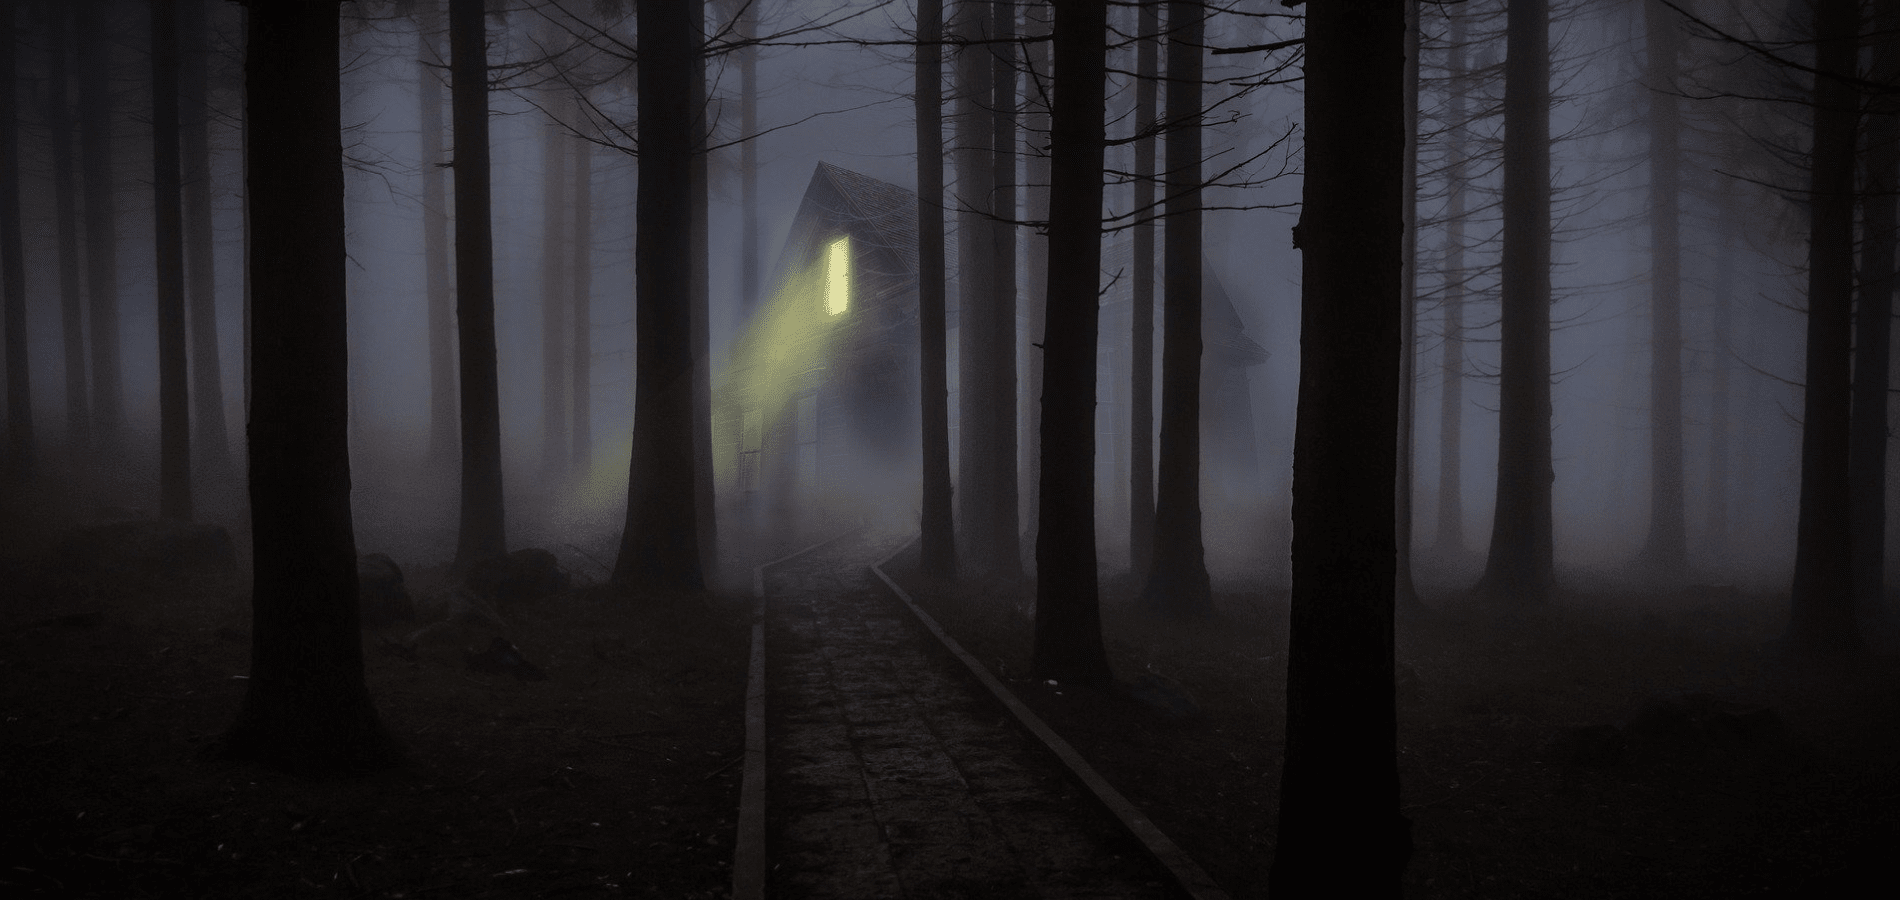 House in a foggy forest at night